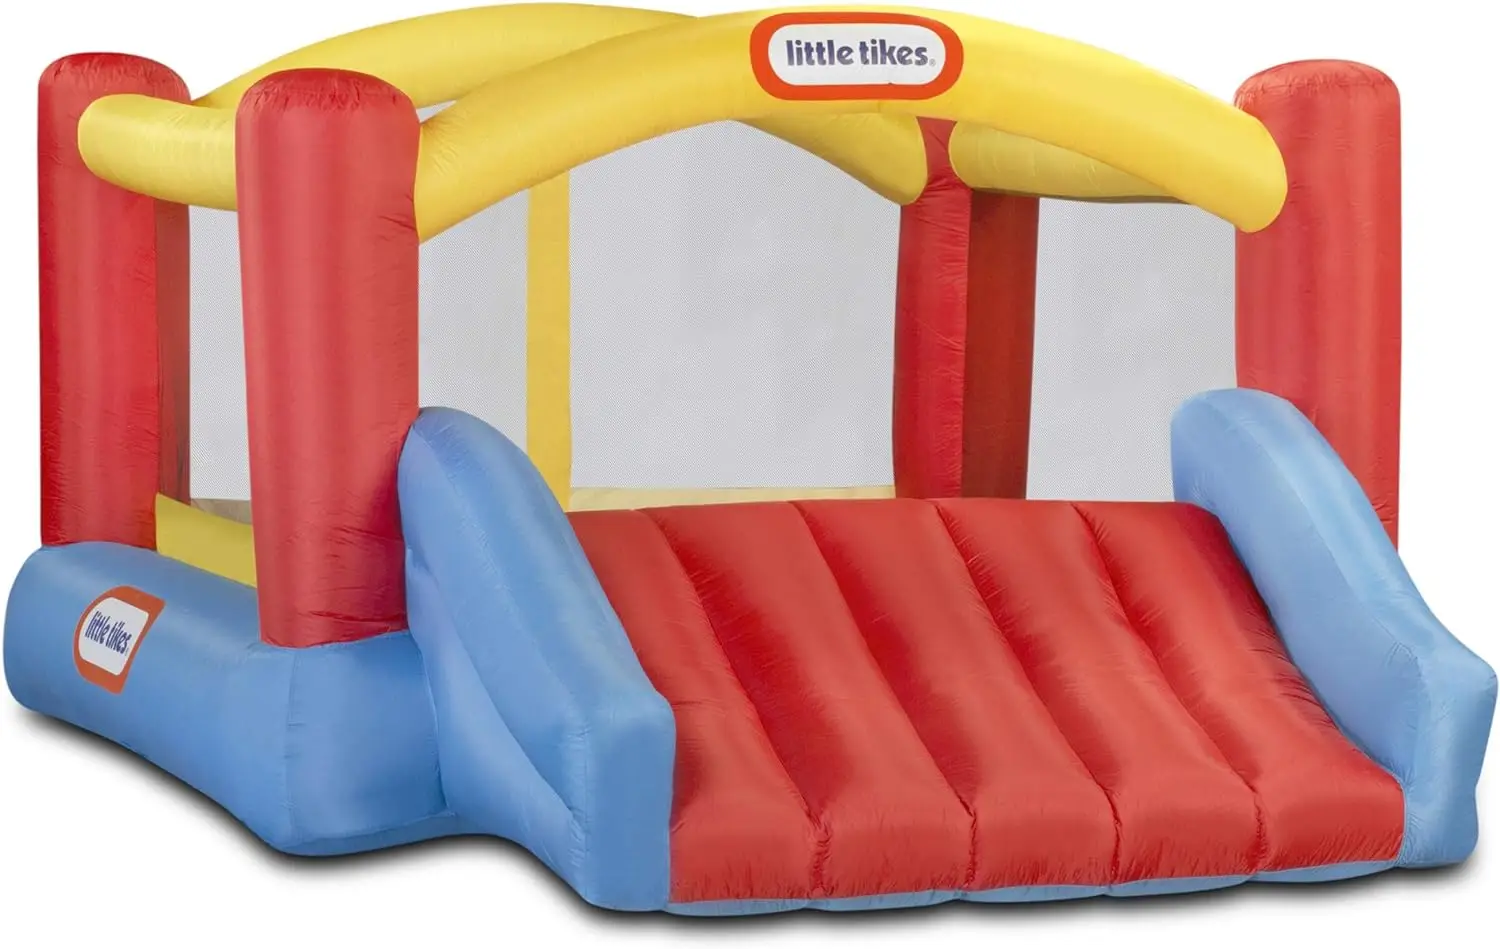 

Little Tikes Jump 'n Slide Inflatable Includes Heavy Duty Blower With GFCI, Stakes, Repair Patches, And Storage Bag, for